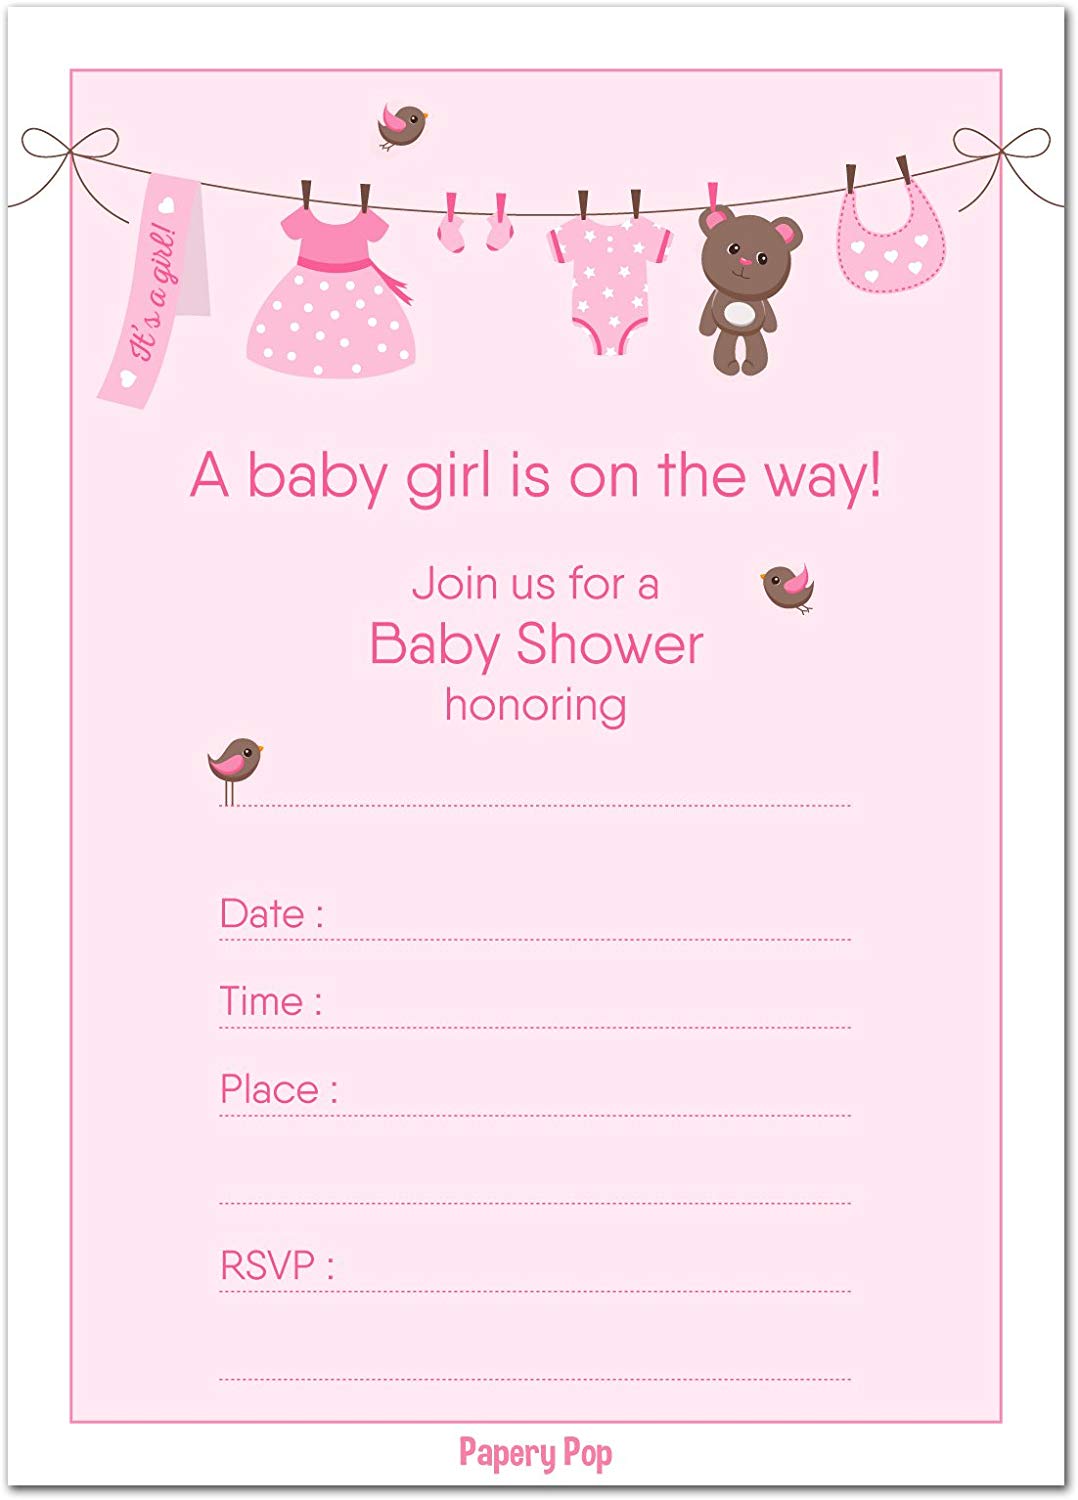 Full Size of Baby Shower:63+ Delightful Cheap Baby Shower Invitations Image Inspirations Baby Shower In With Arreglos Para Baby Shower Plus Baby Shower Wording Together With Princess Baby Shower